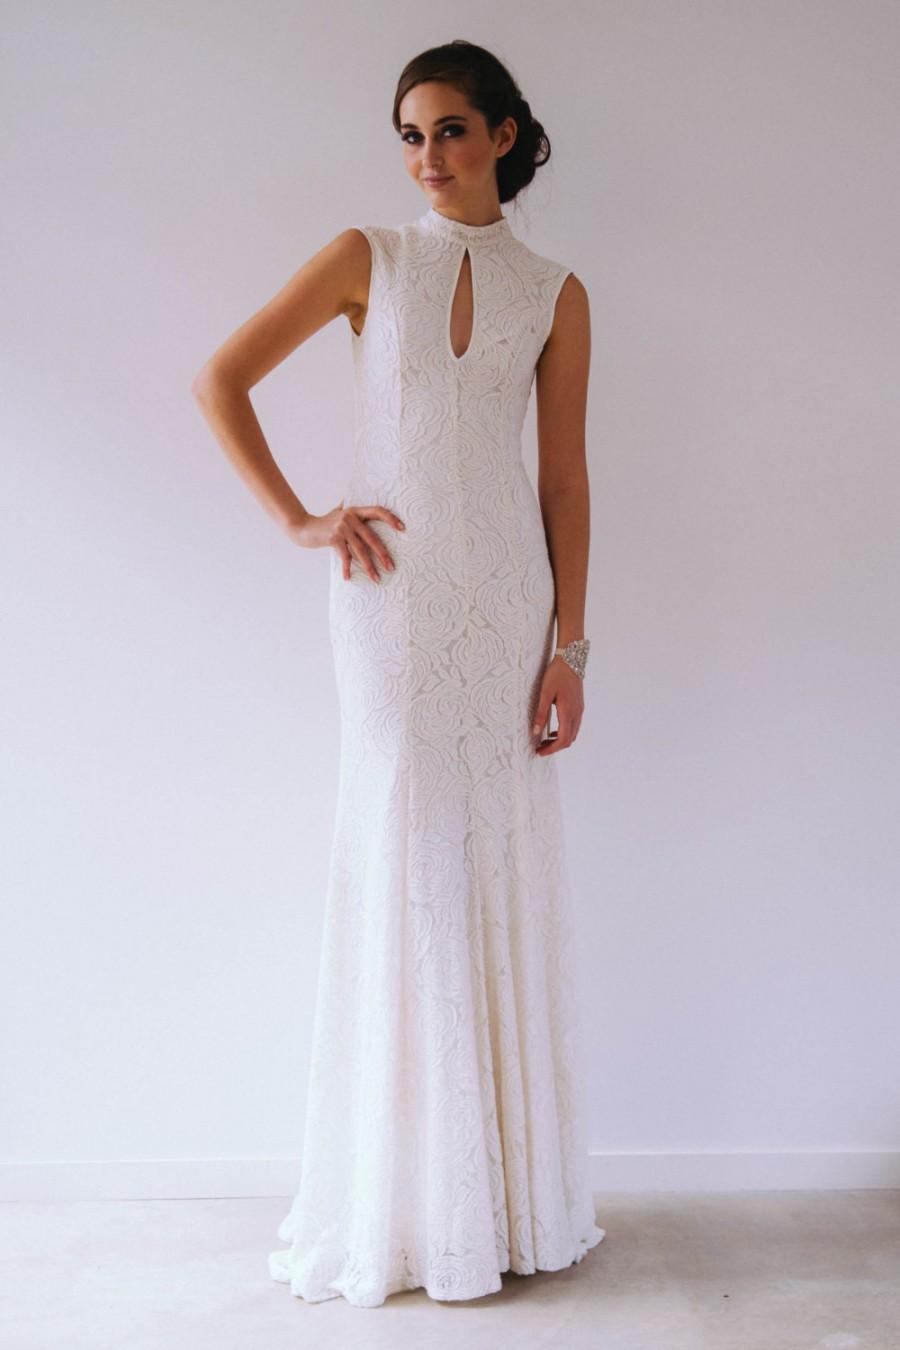 Wedding - High neck lace gown - SAMPLE SALE